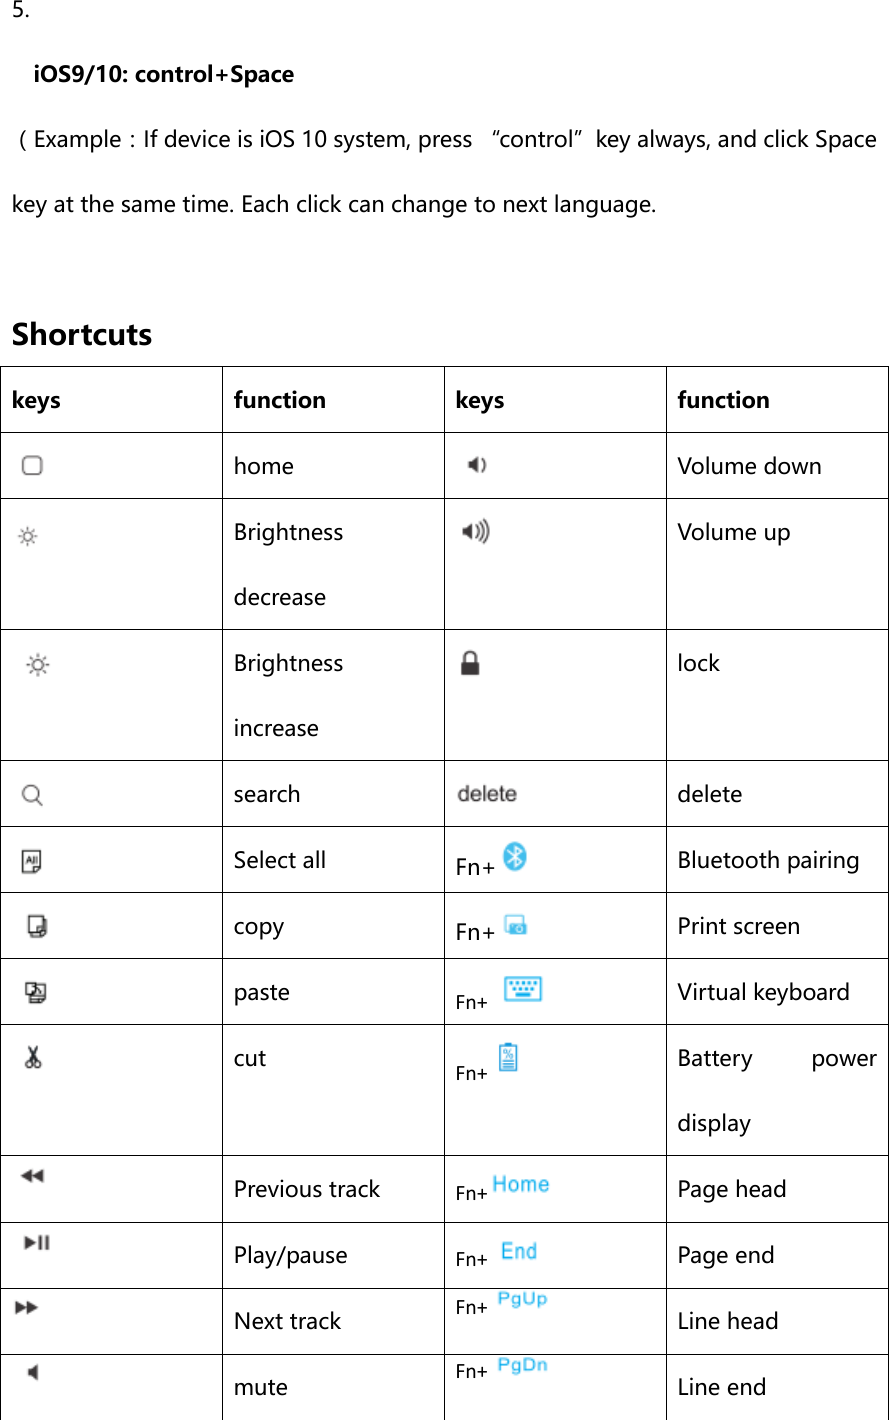 5. iOS9/10: control+Space （Example：If device is iOS 10 system, press “control”key always, and click Space key at the same time. Each click can change to next language.  Shortcuts   keys function keys function    home    Volume down  Brightness decrease  Volume up  Brightness increase    lock  search  delete    Select all Fn+    Bluetooth pairing    copy Fn+    Print screen    paste Fn+     Virtual keyboard    cut Fn+    Battery  power display   Previous track Fn+   Page head   Play/pause Fn+   Page end   Next track Fn+   Line head   mute Fn+    Line end 